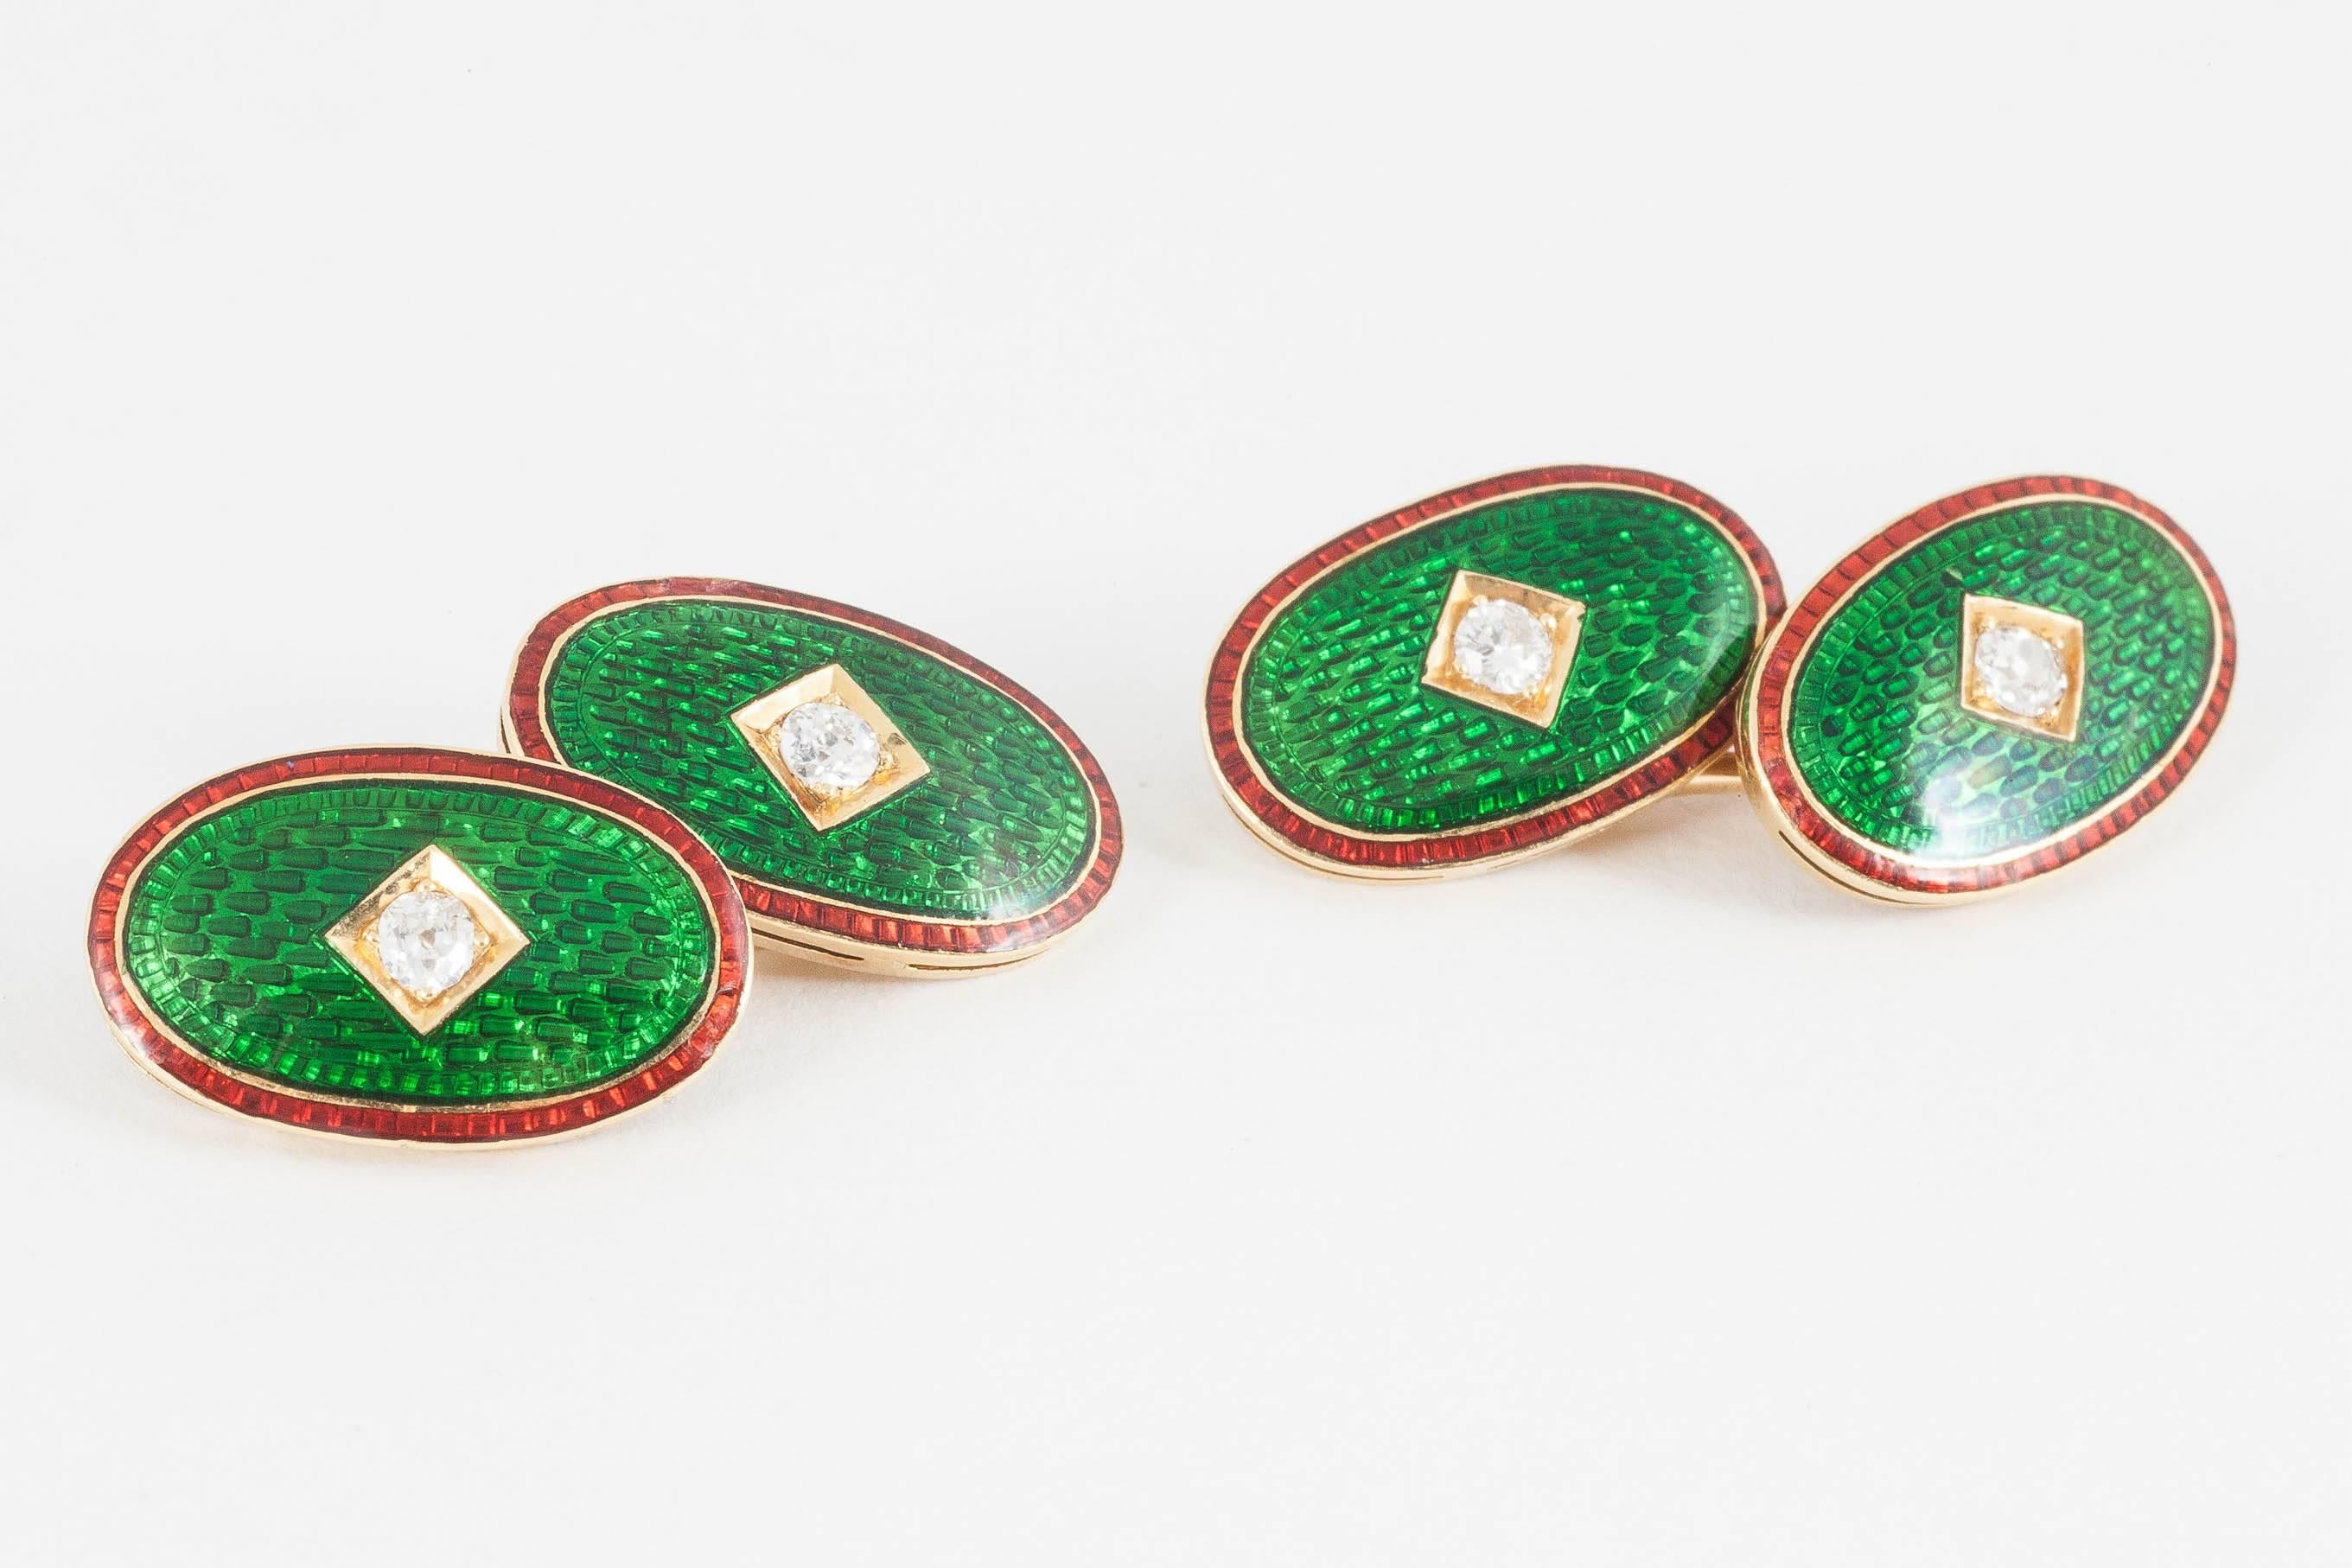 A finely made pair of oval,18ct yellow gold cufflinks, with a bright and vibrant green enamel face,edged in red enamel and set with an old cut brilliant diamond centre.English c,1890